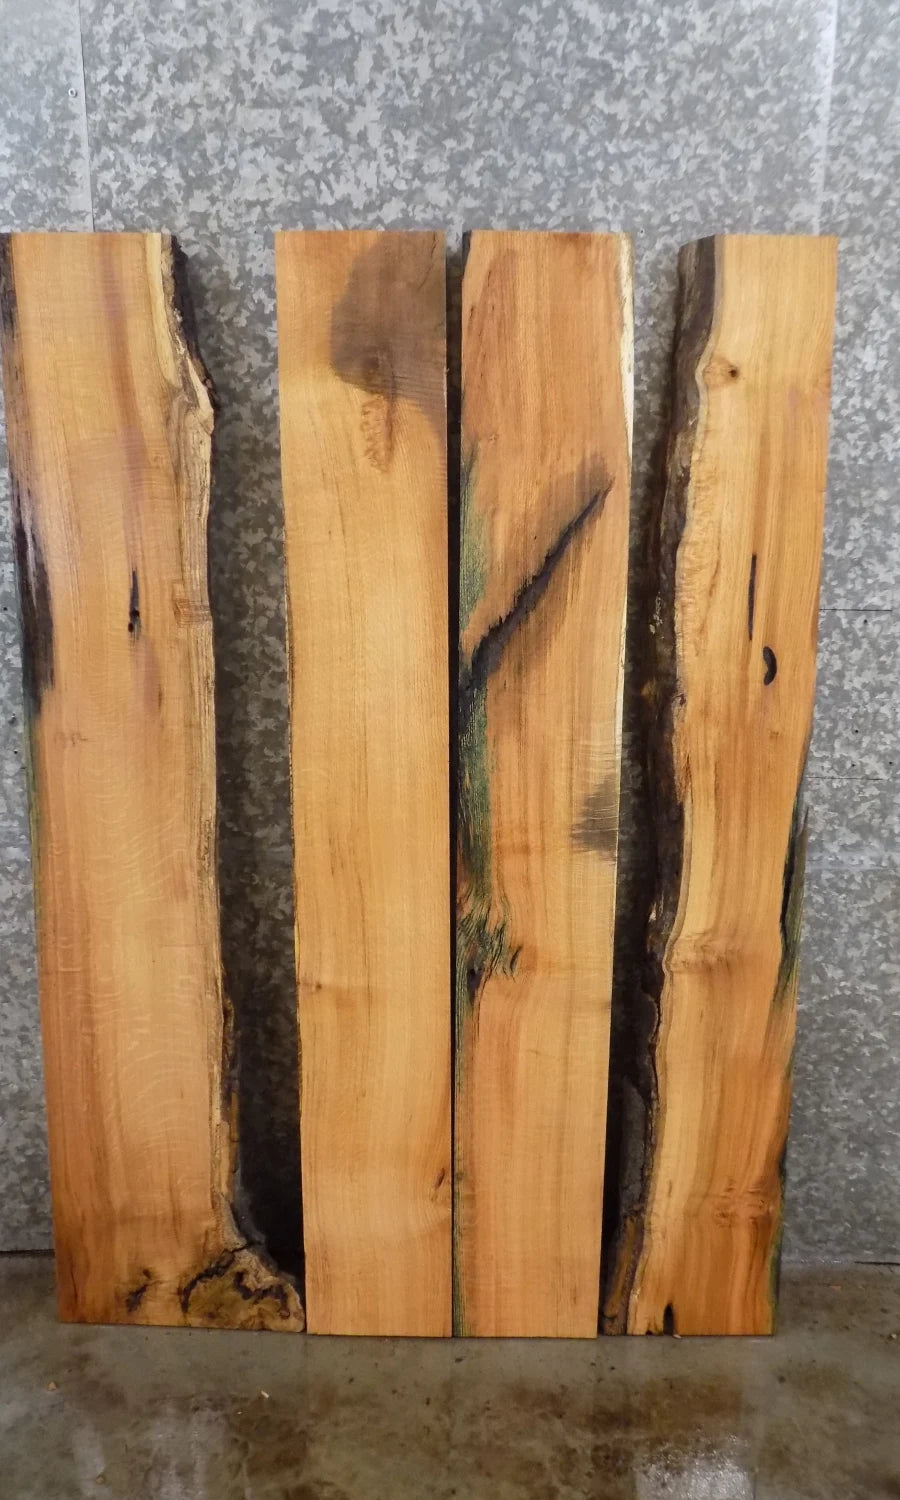 4- Live Edge Bookmatched Red Oak Dining/Kitchen Table Top Set 40043-40044,40048-40049